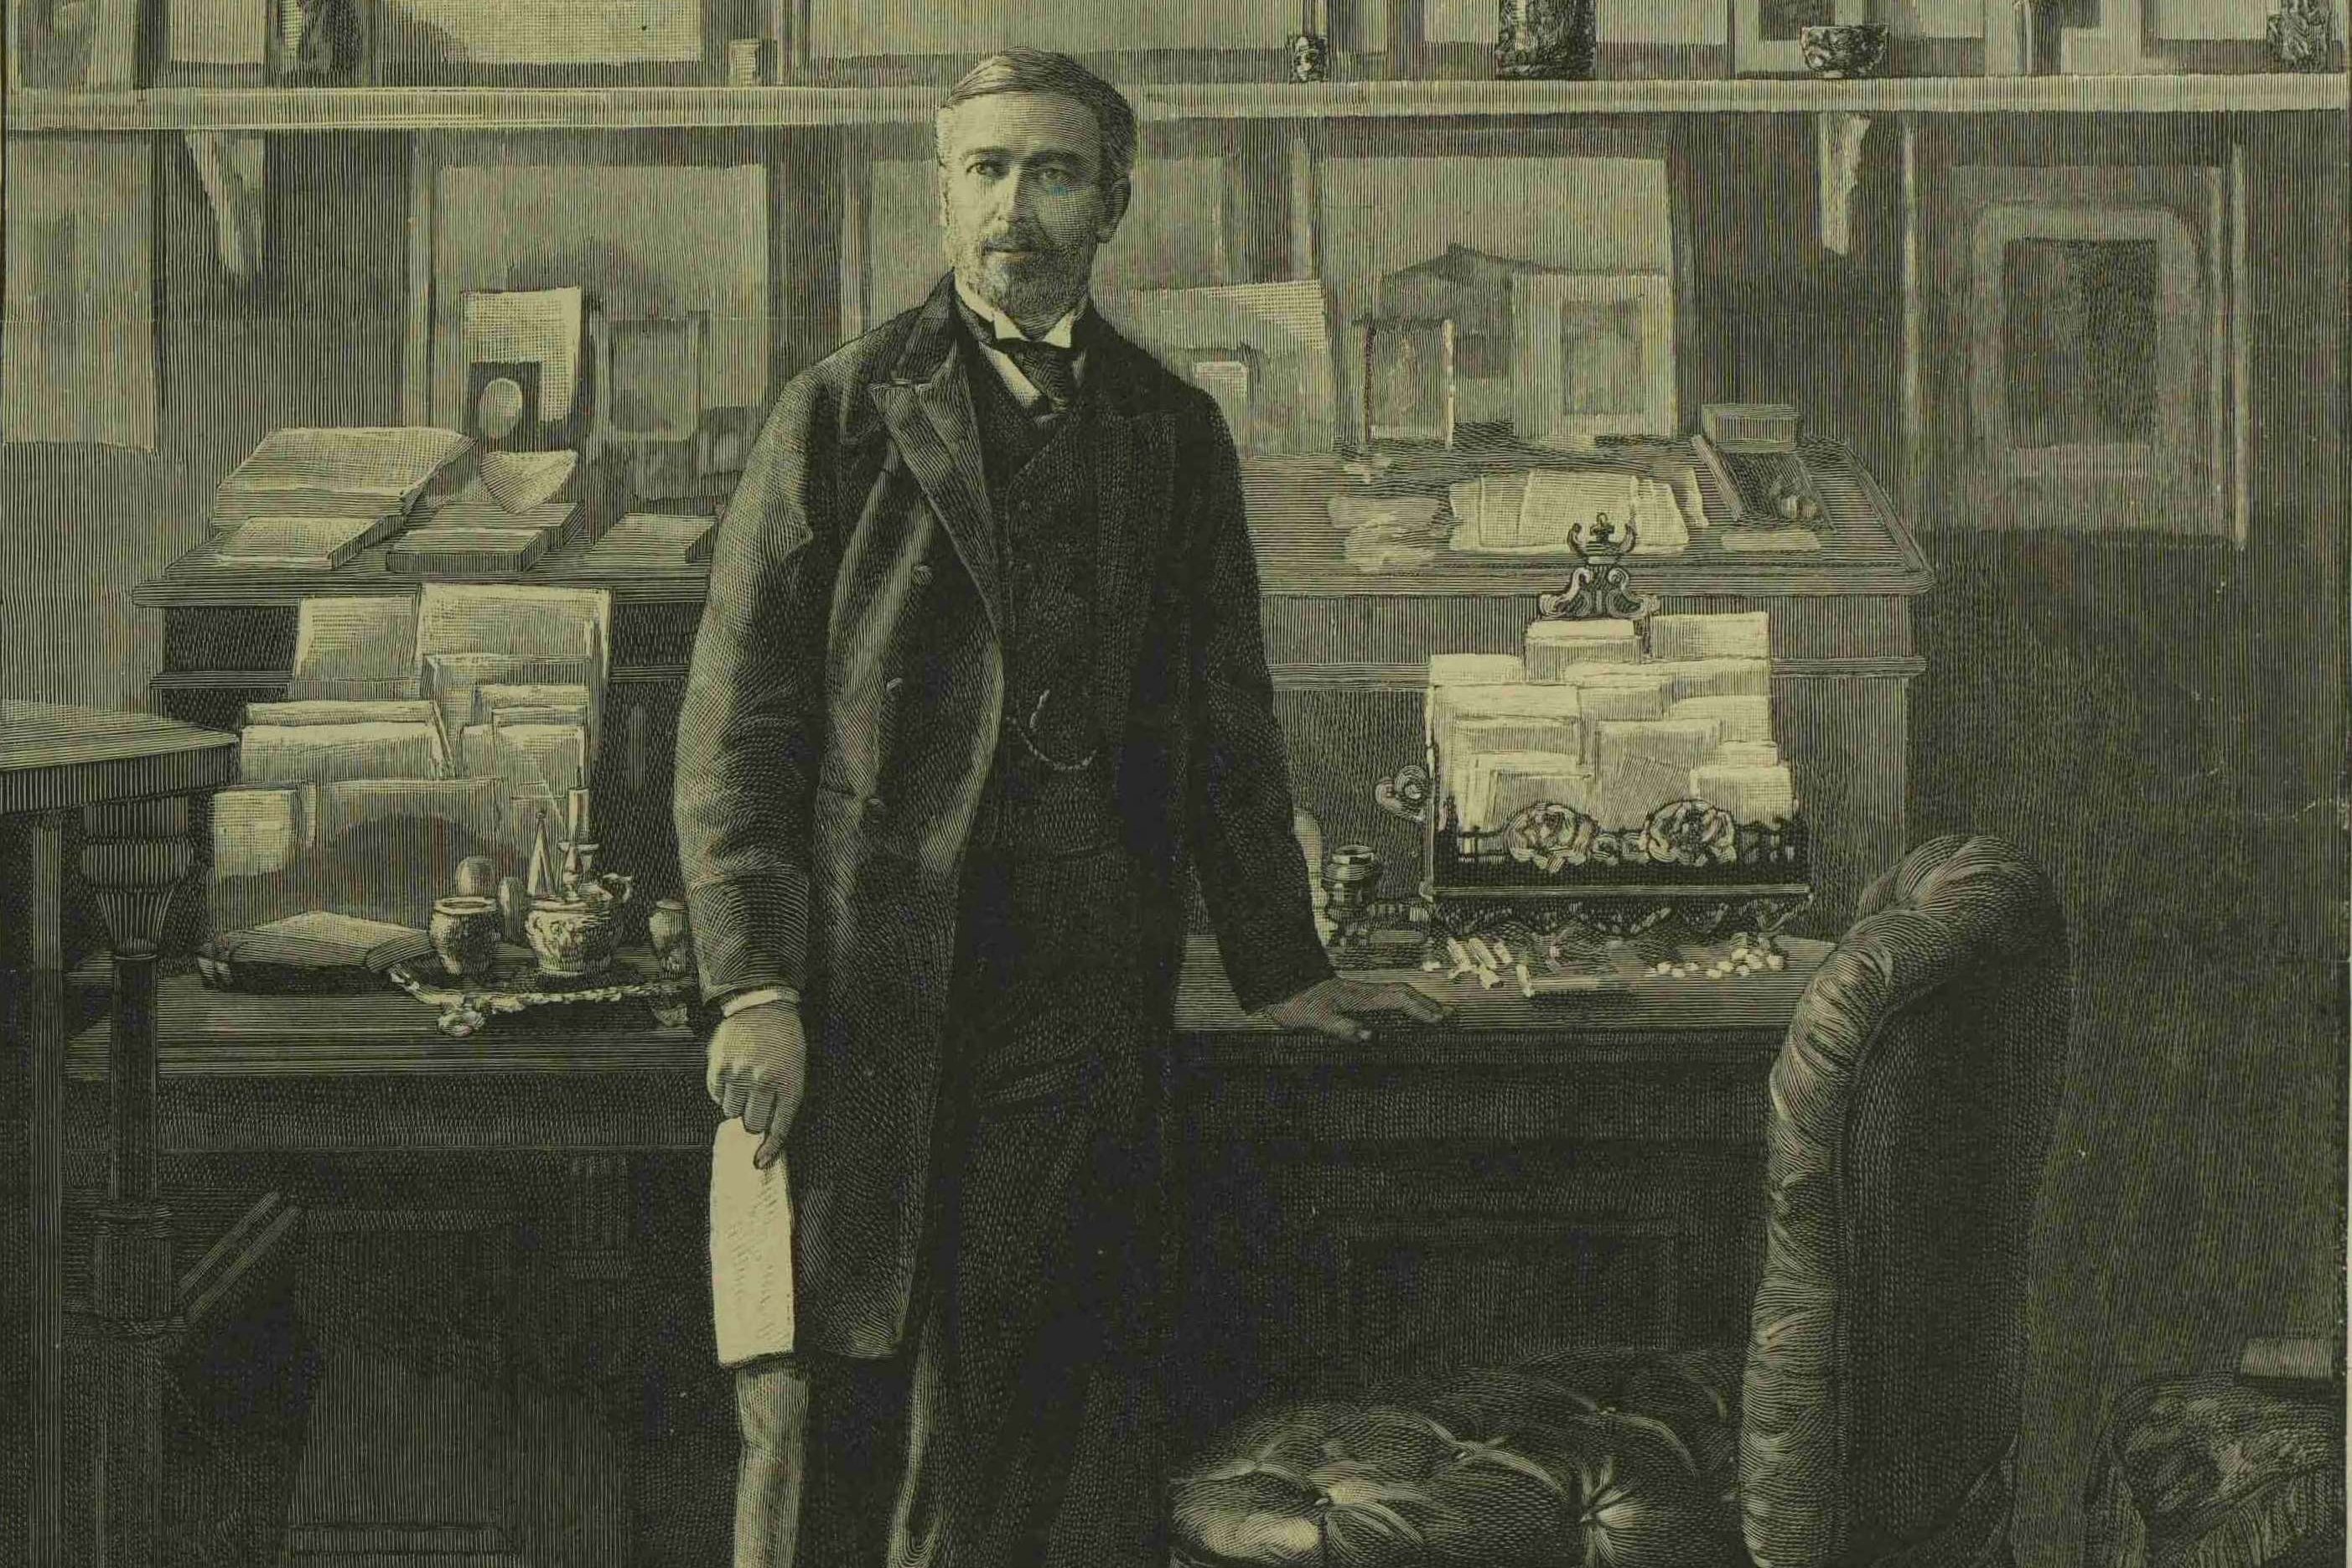 Engraving of a portrait of Sir Edward Malet in his study at the British embassy, Berlin, 1893